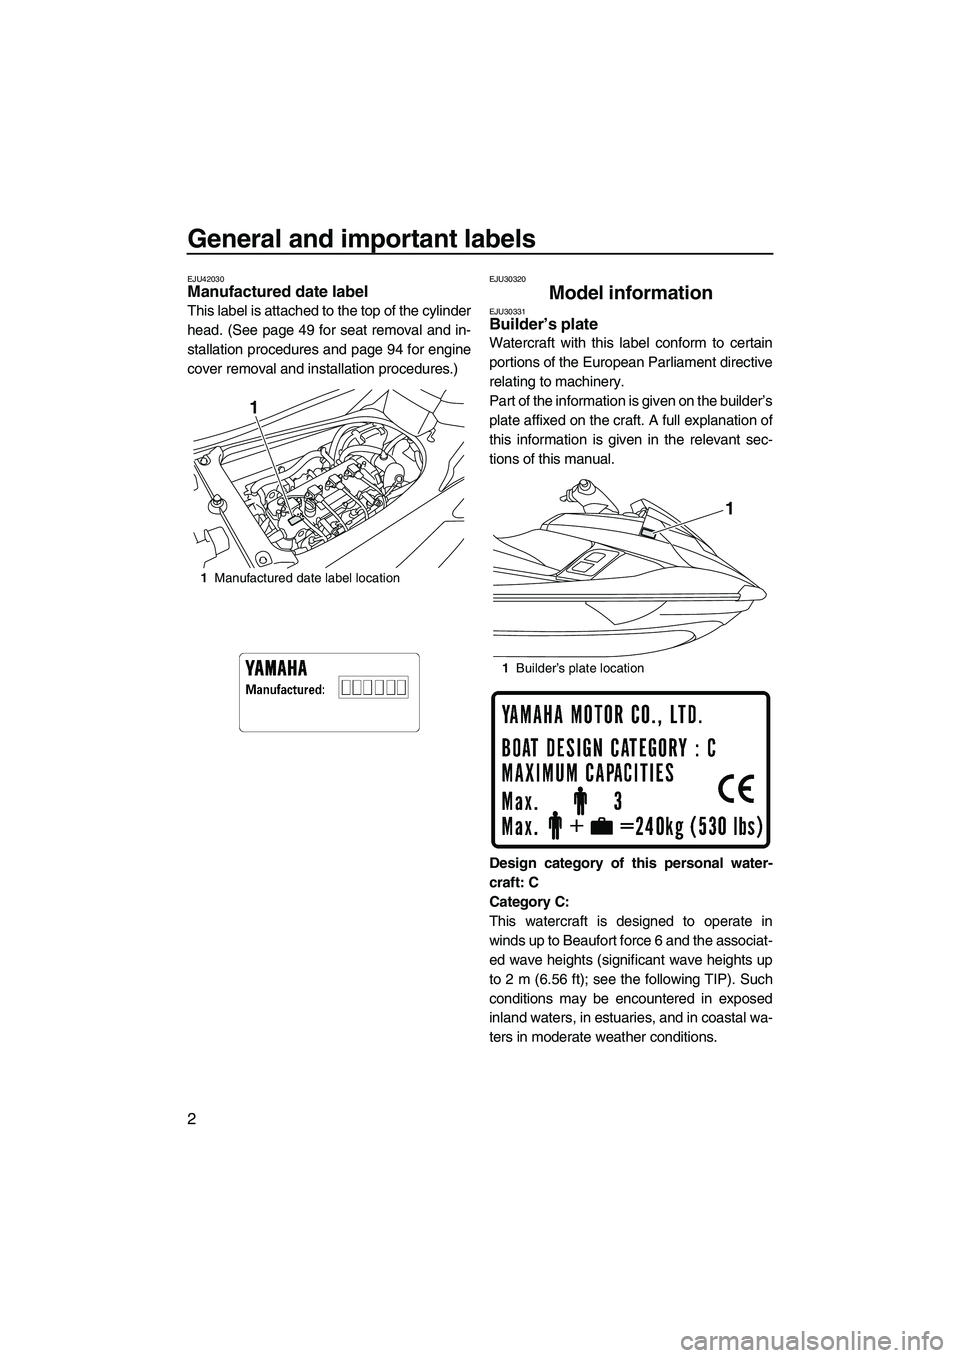 YAMAHA FX HO CRUISER 2013  Owners Manual General and important labels
2
EJU42030Manufactured date label 
This label is attached to the top of the cylinder
head. (See page 49 for seat removal and in-
stallation procedures and page 94 for engi